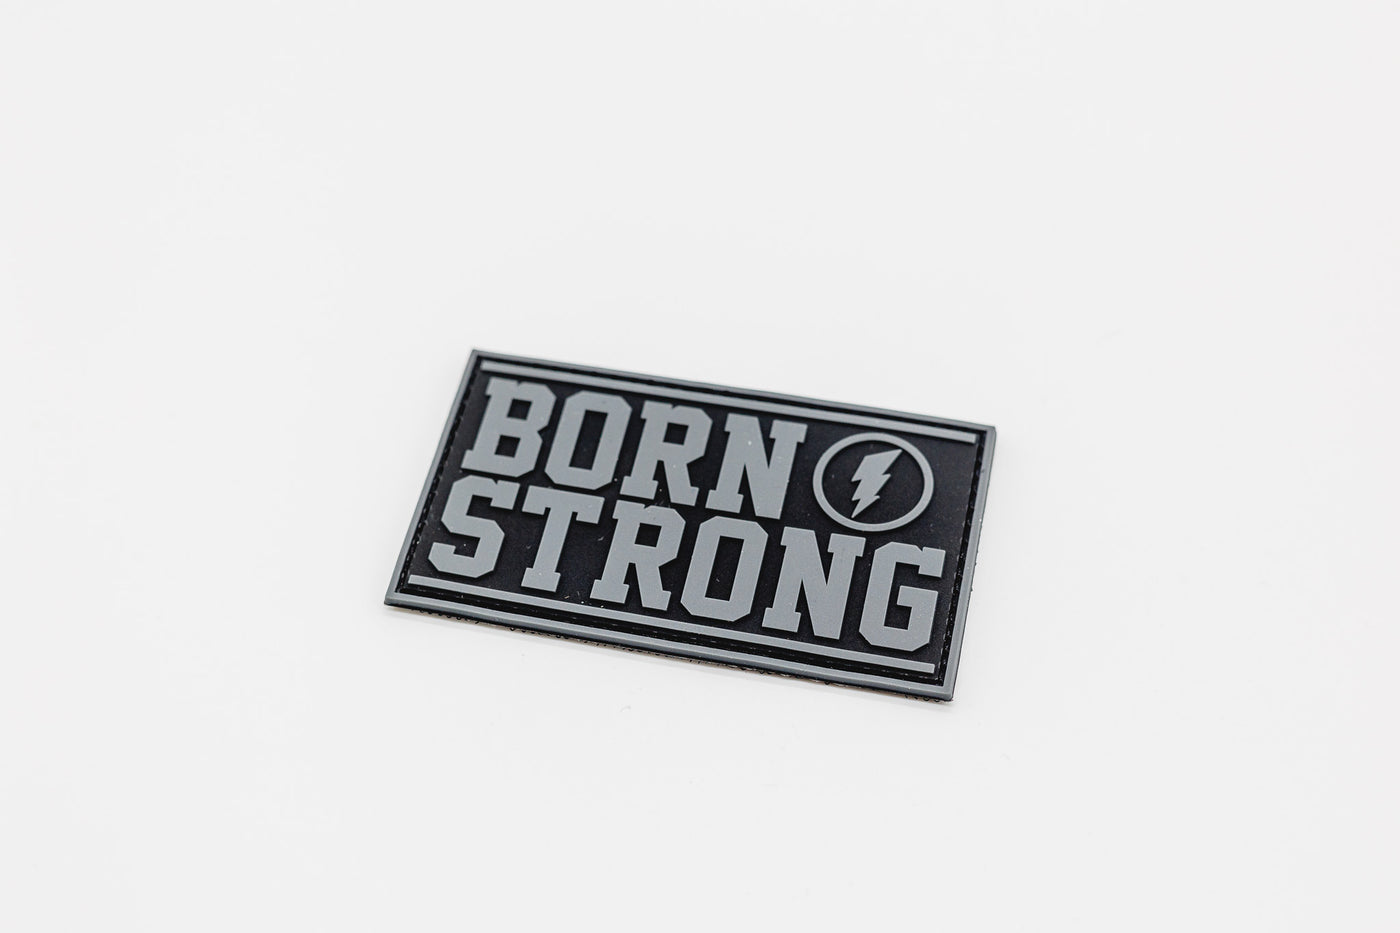 BORN STRONG Logo - Patch